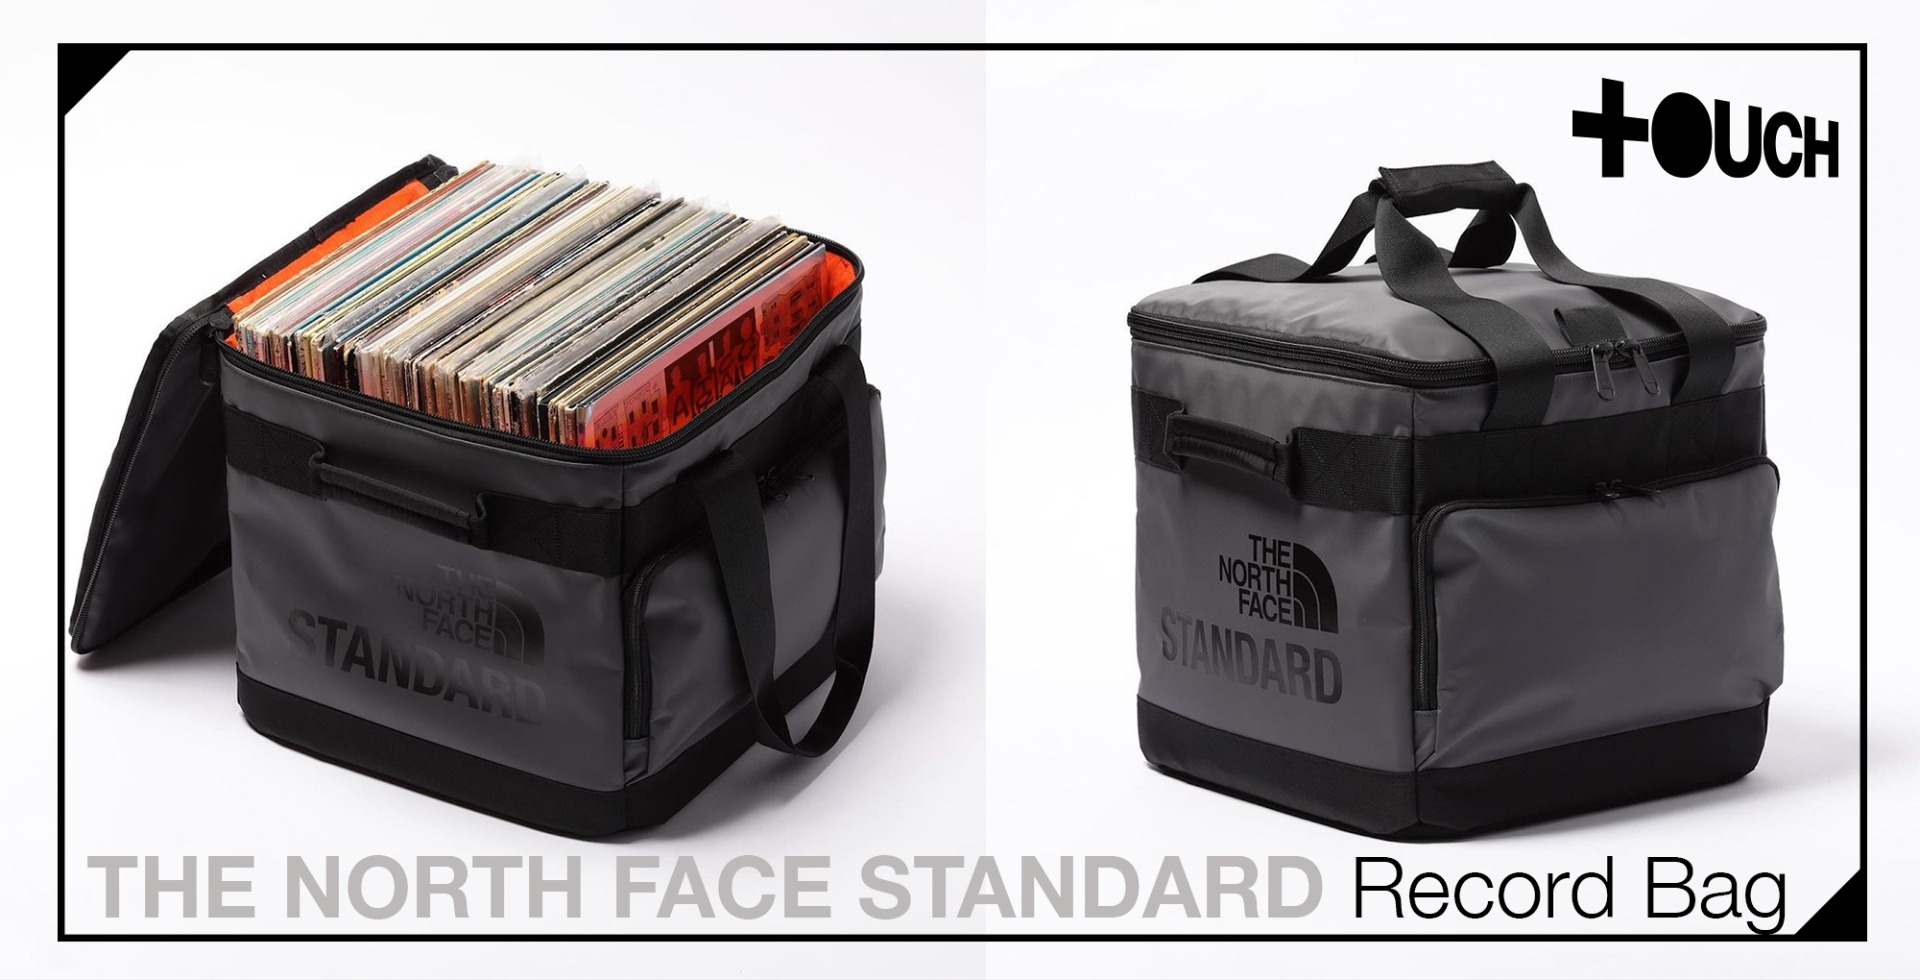 EAST TOUCH - CULTURE - THE NORTH FACE STANDARD Record Bag 戶外 